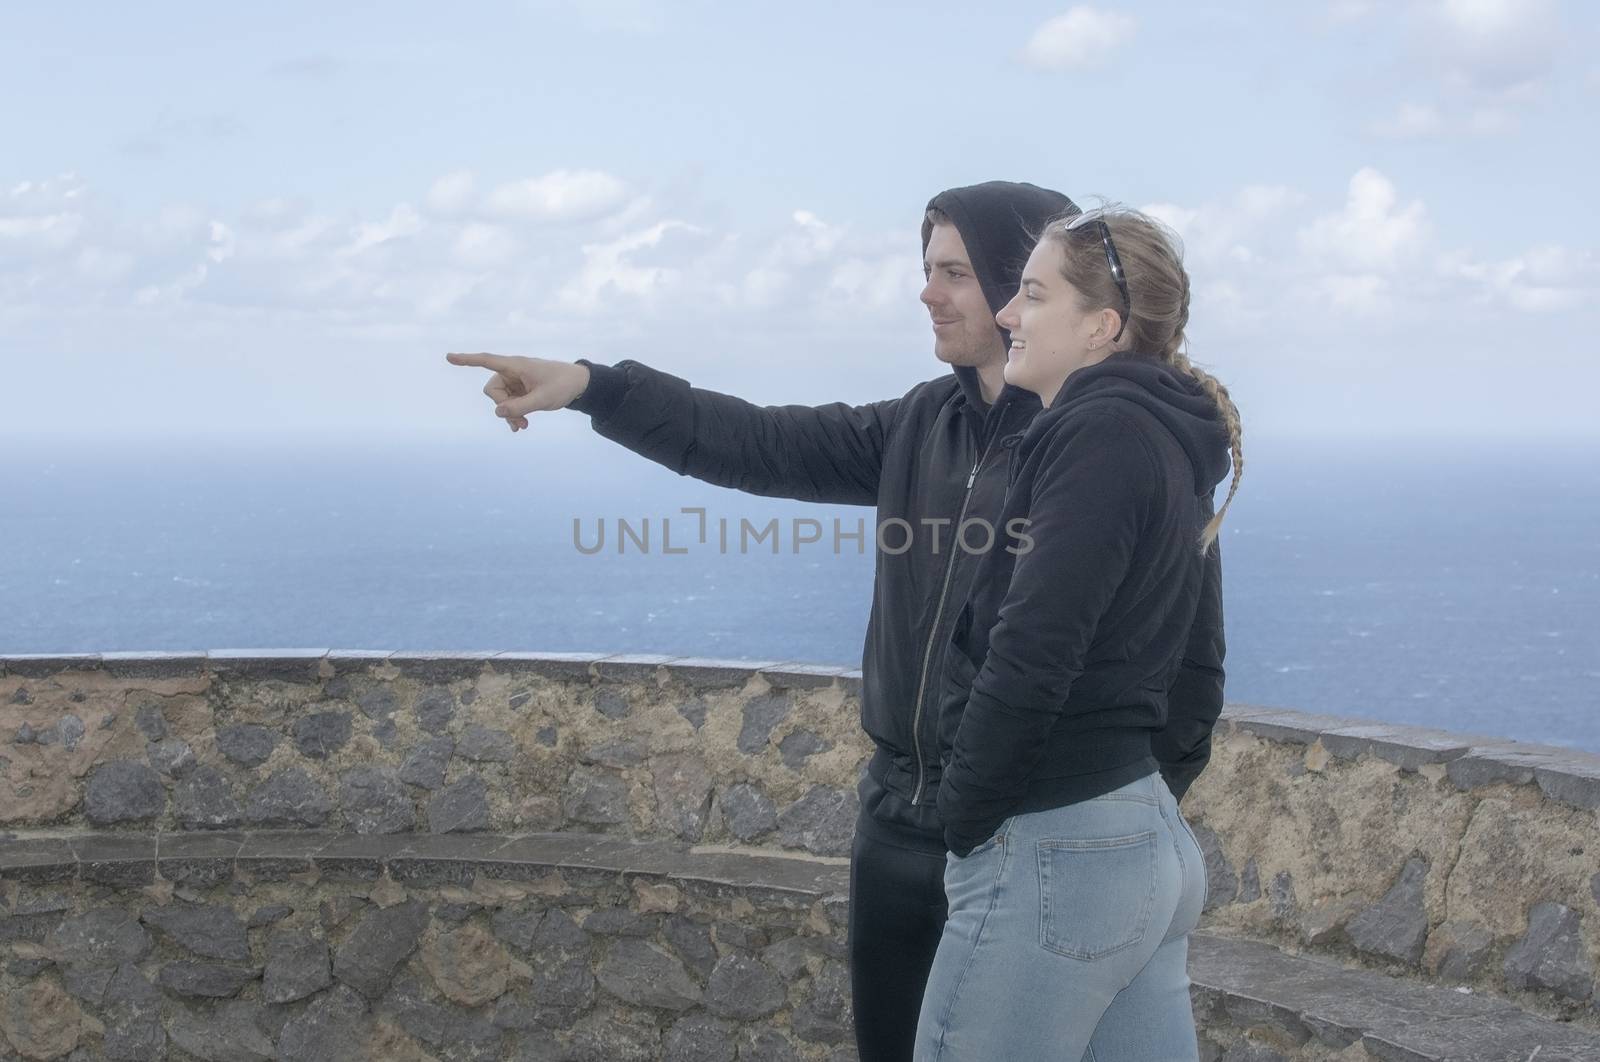 Young beautiful casually dressed couple stand high up pointing and watching out to sea on a spring day in Mallorca, Spain.